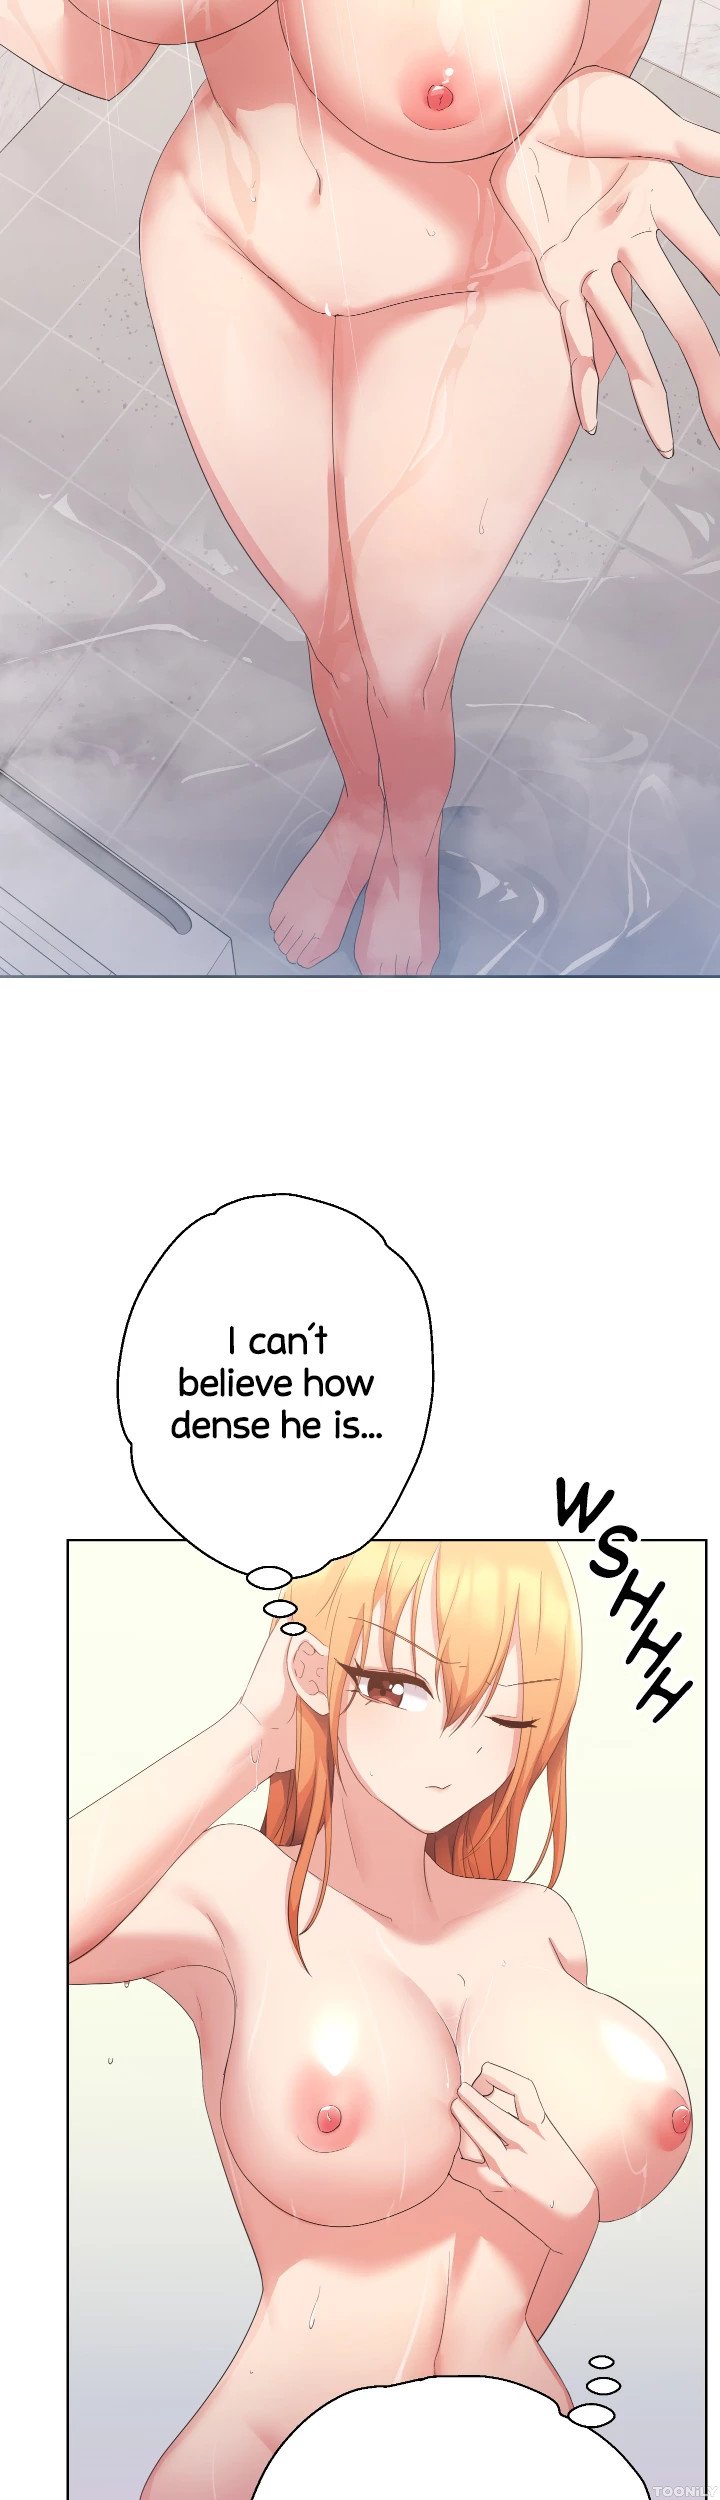 girls-i-used-to-teach-chap-3-28